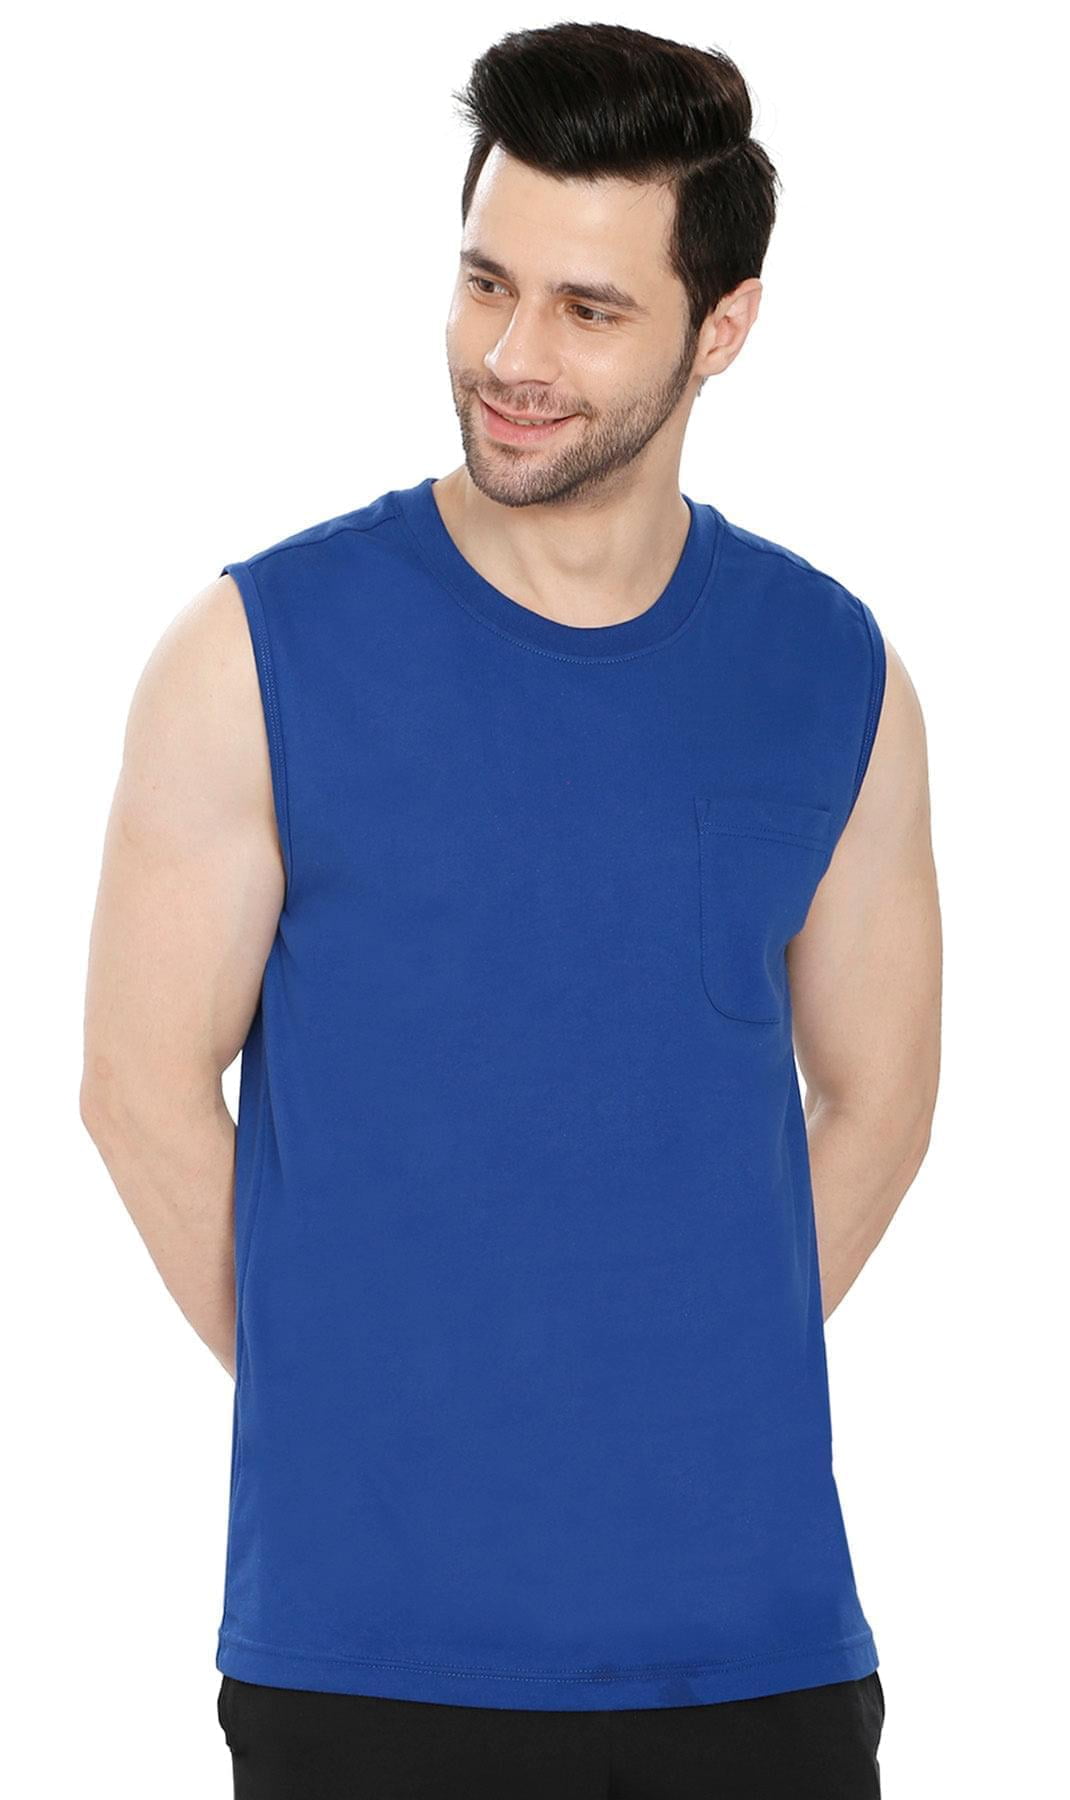 Men's Sleeveless T-Shirt with Pocket - Cool Off in Our Tough Tank ...